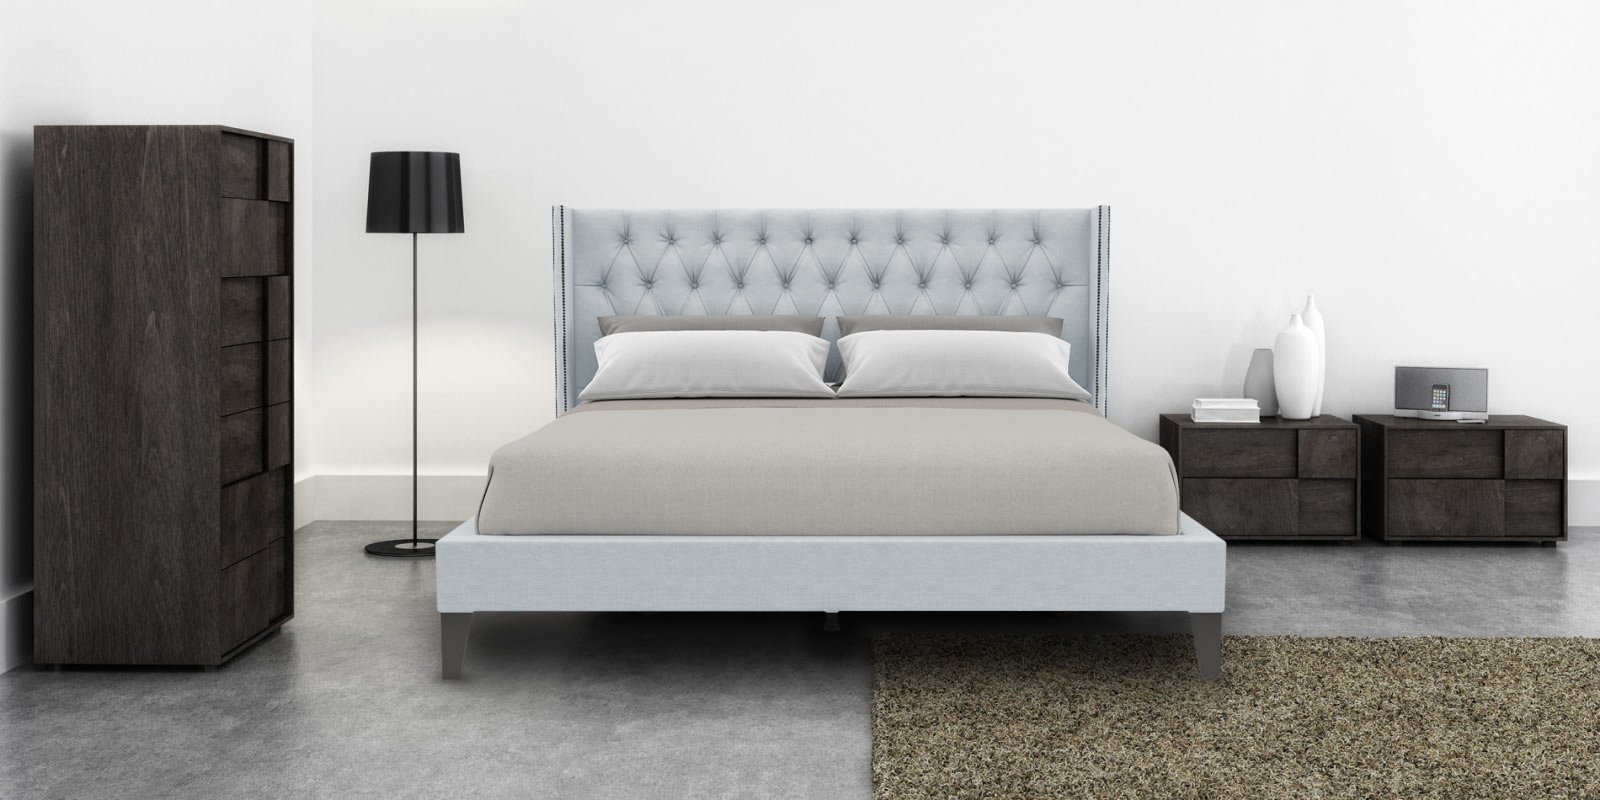 Home Treats Deluxe Padded Leather Bed Frame Double, No Mattress Modern Curved Upholstered Bed With Slatted Base Available With Pocket Sprung Mattress 